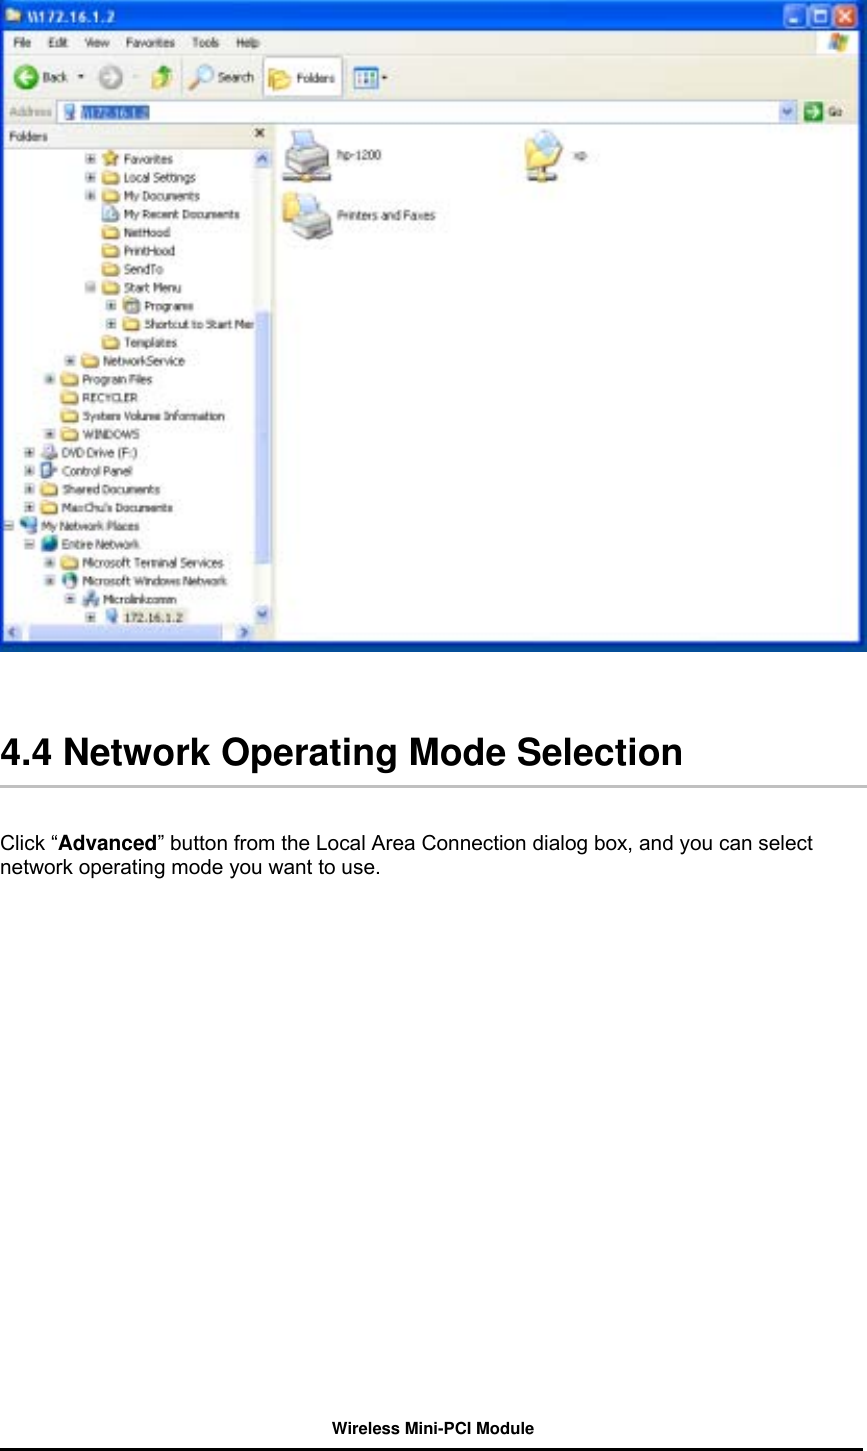 Wireless Mini-PCI Module      4.4 Network Operating Mode Selection   Click “Advanced” button from the Local Area Connection dialog box, and you can select network operating mode you want to use.   